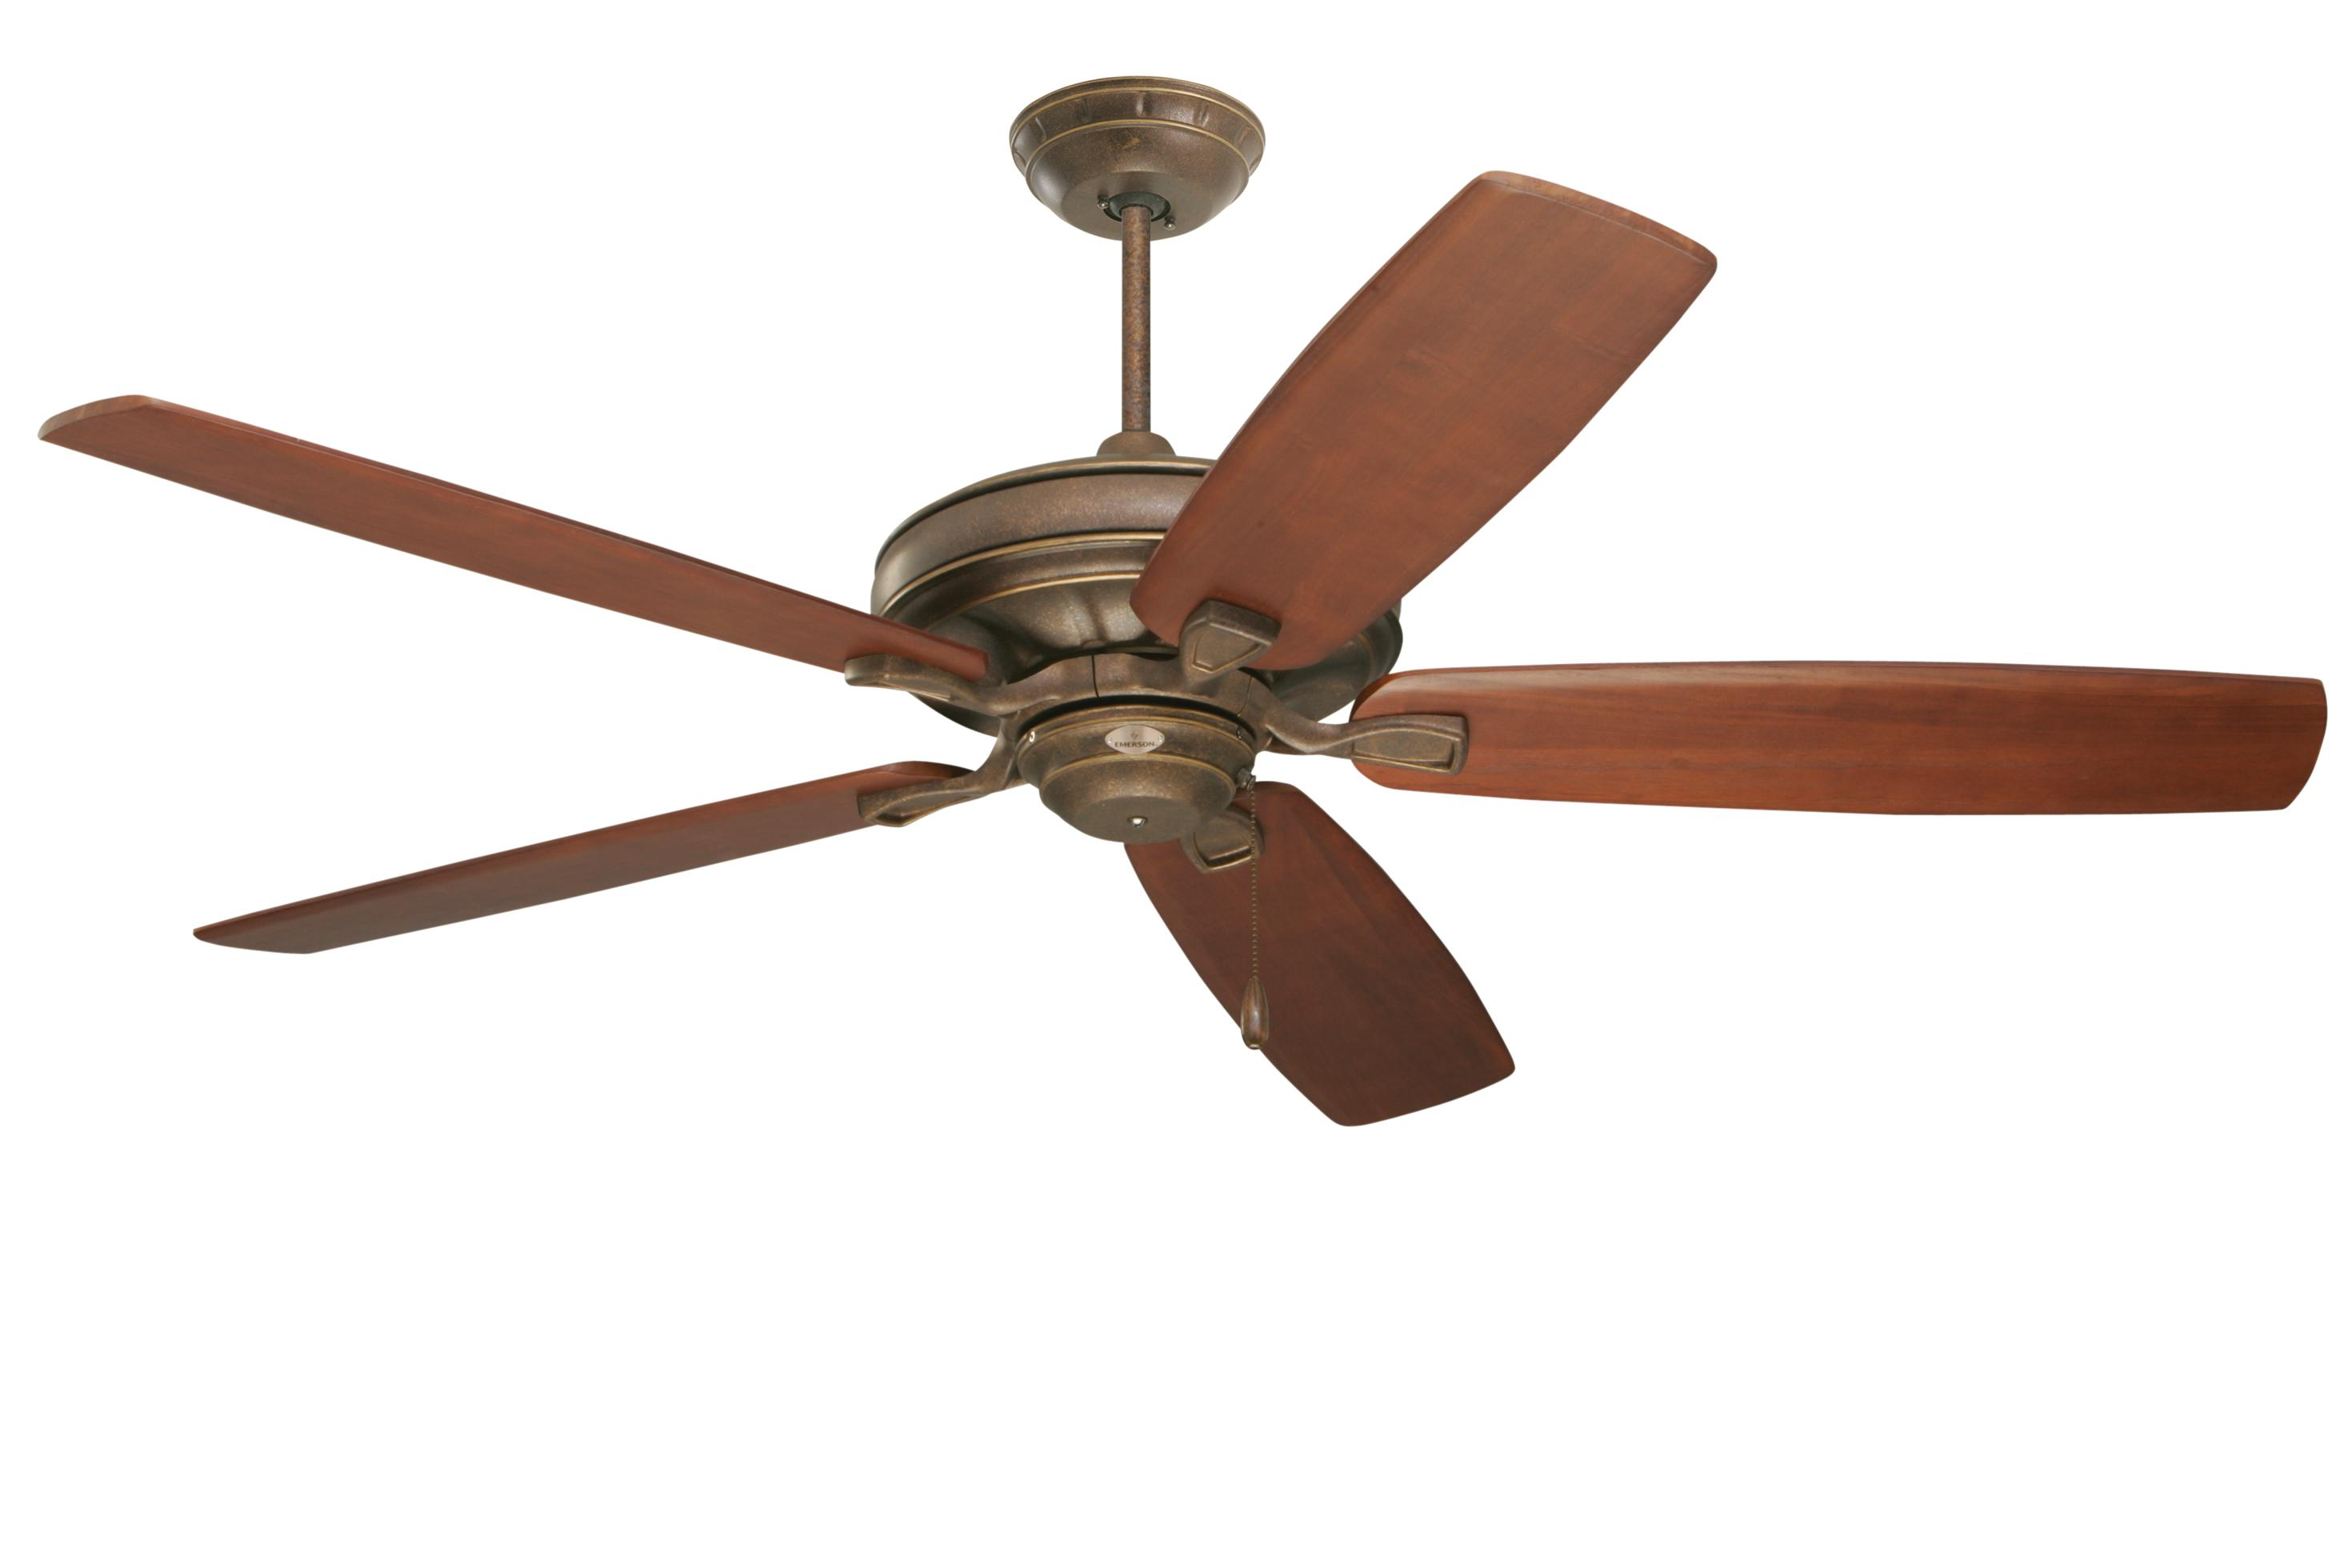 Locate the fan and check for any physical damage or obstructions.
If you notice any issues, such as a broken fan blade or debris blocking the fan, you may need to replace the fan.